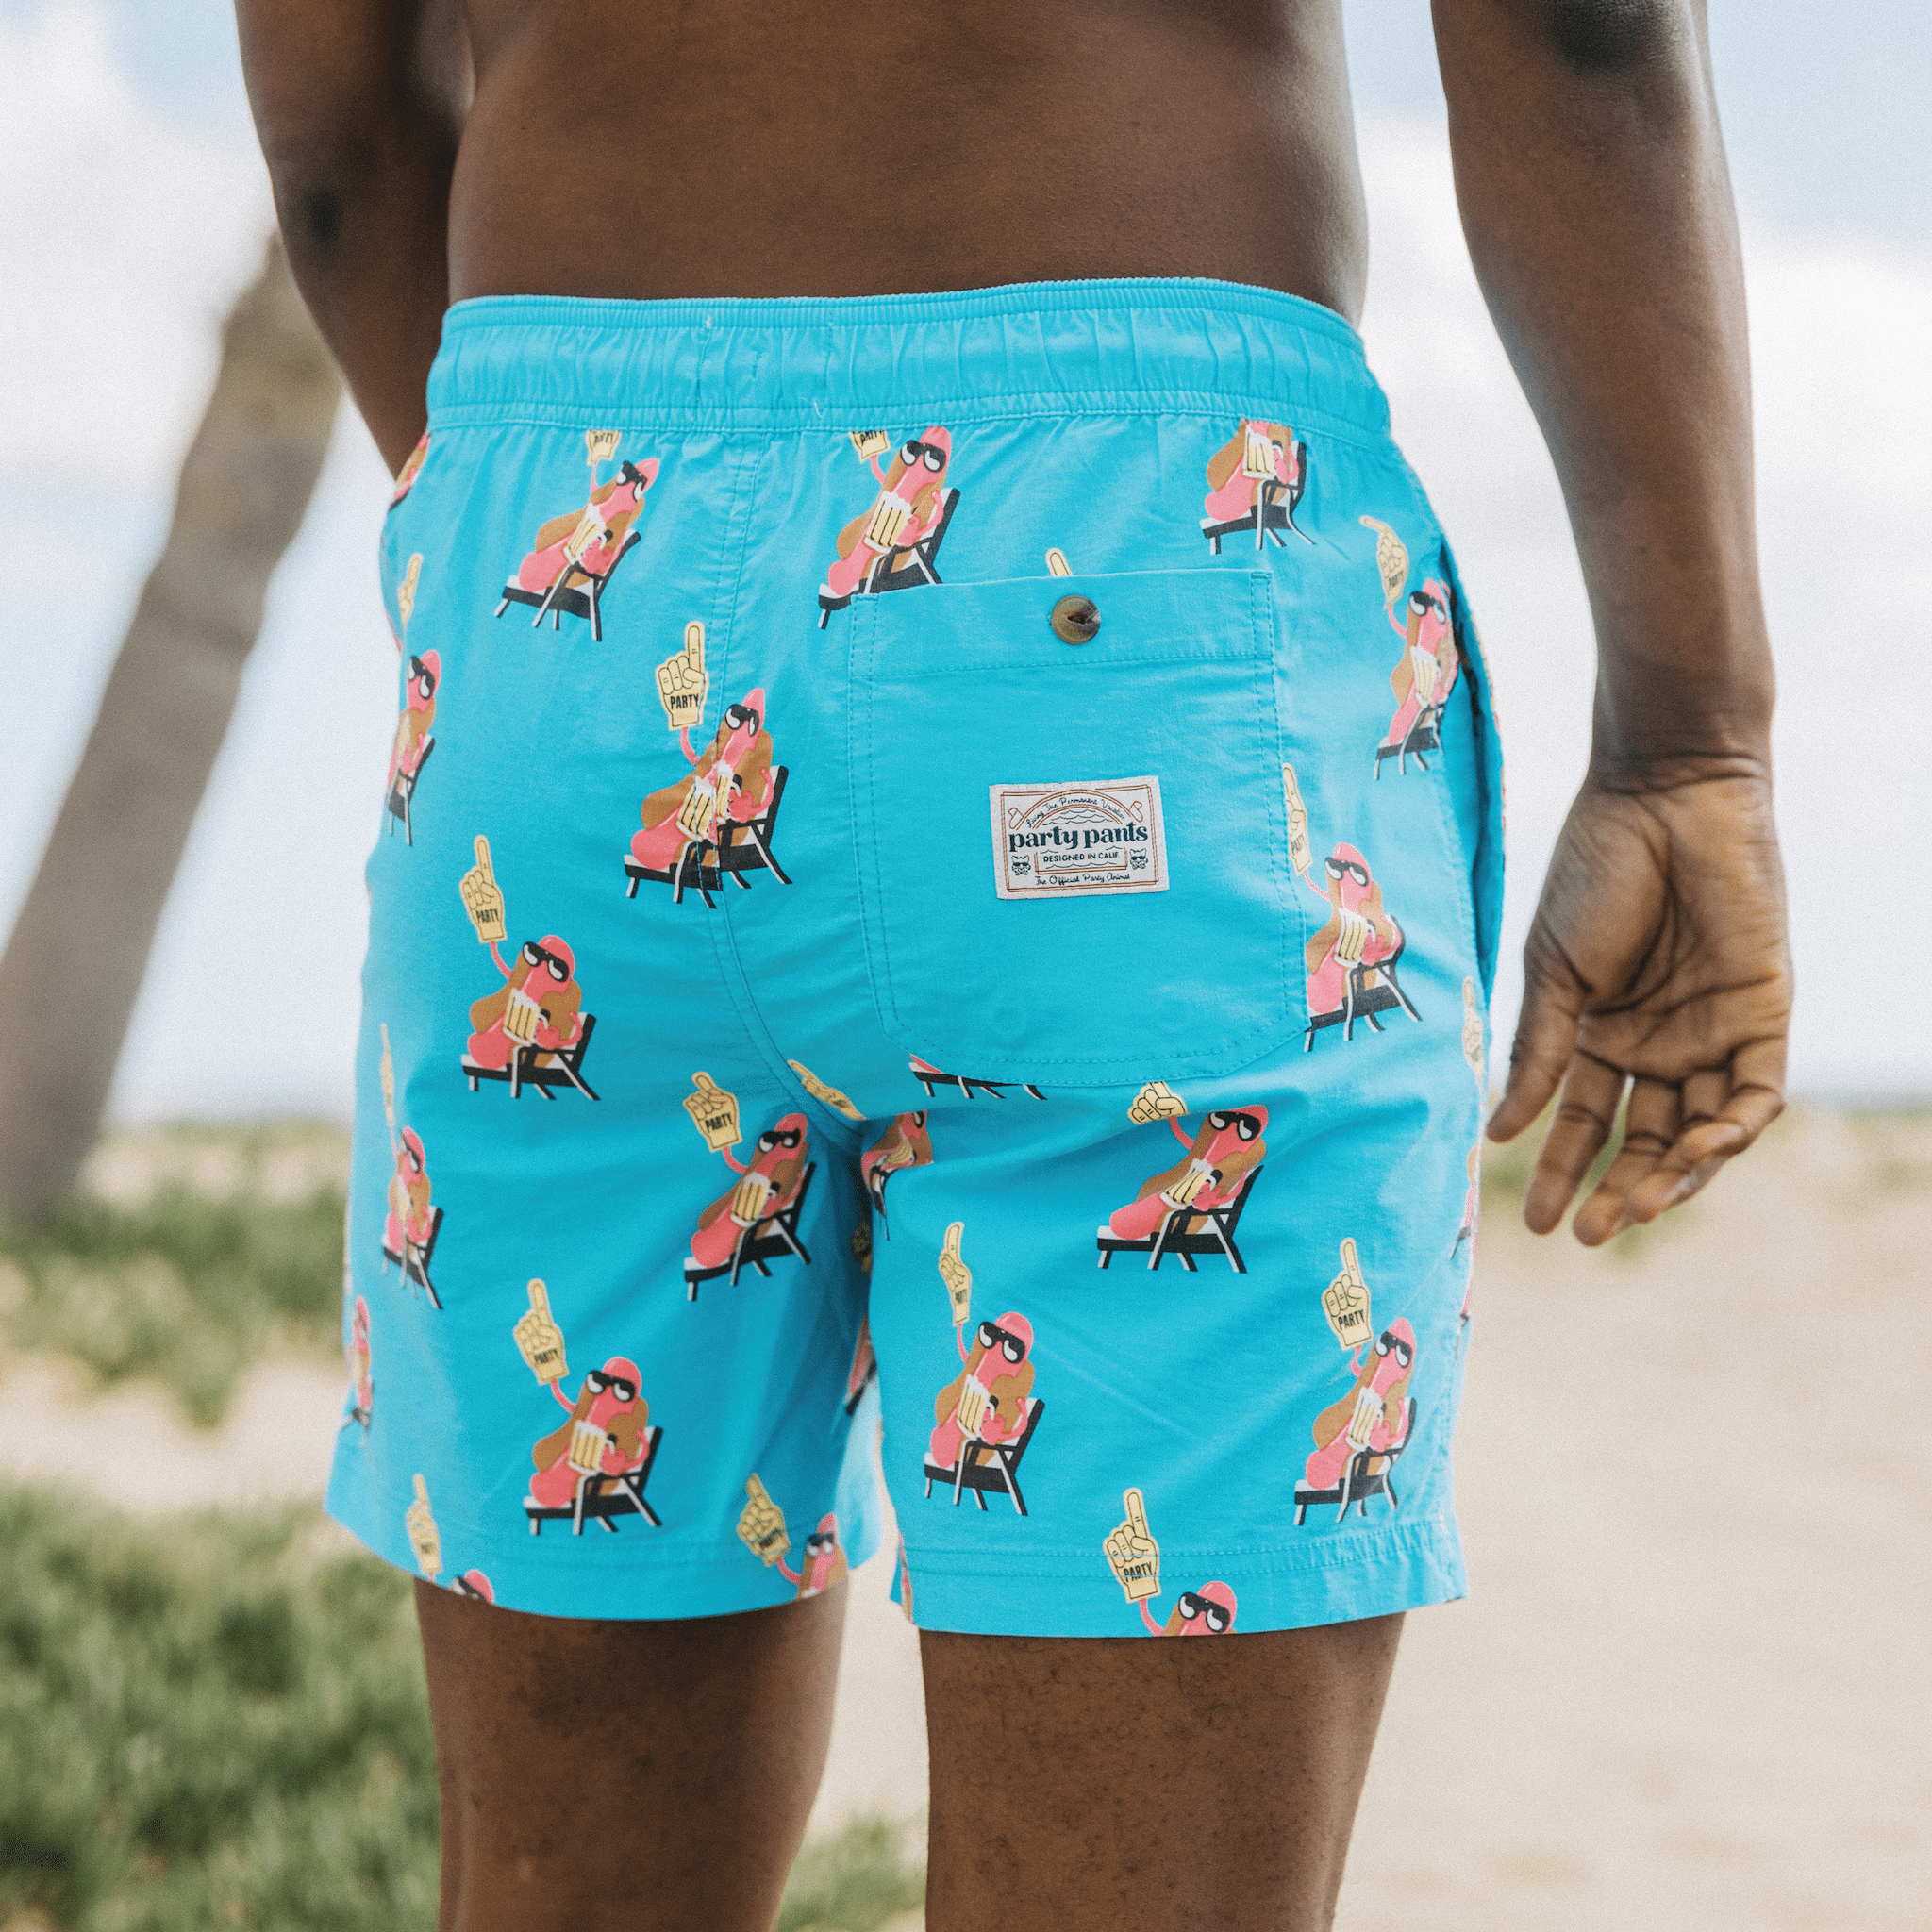 NEW Pull-In Underwear Beer Print Board Shorts Swim Shorts Men XS 30 SOLD  OUT